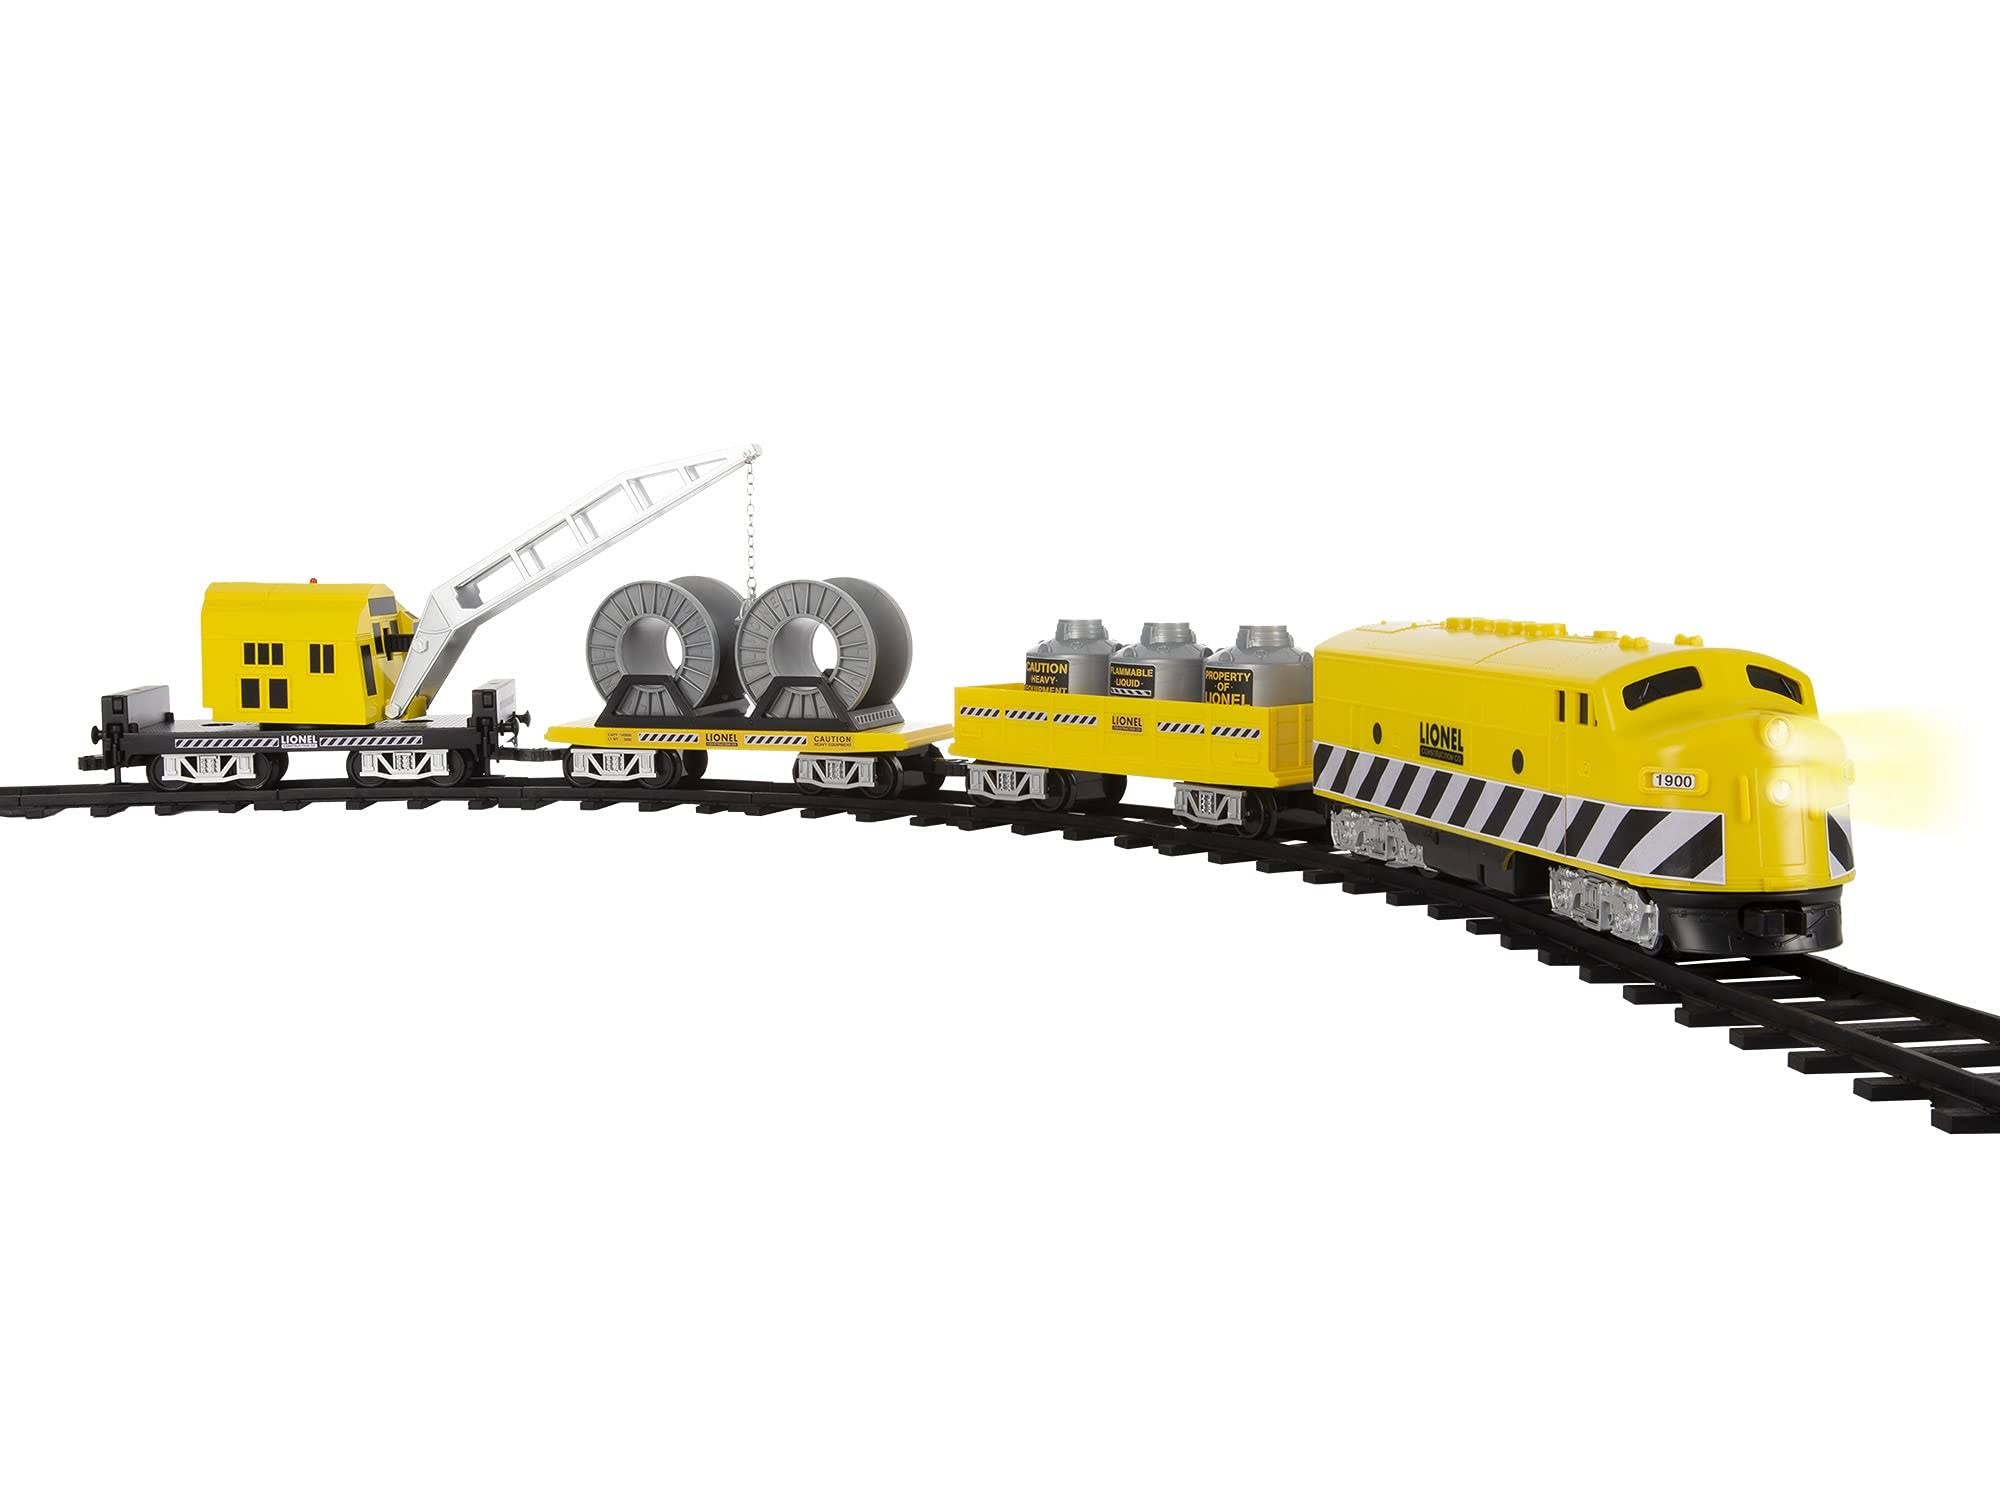 Lionel Construction Ready-to-Play Train Set